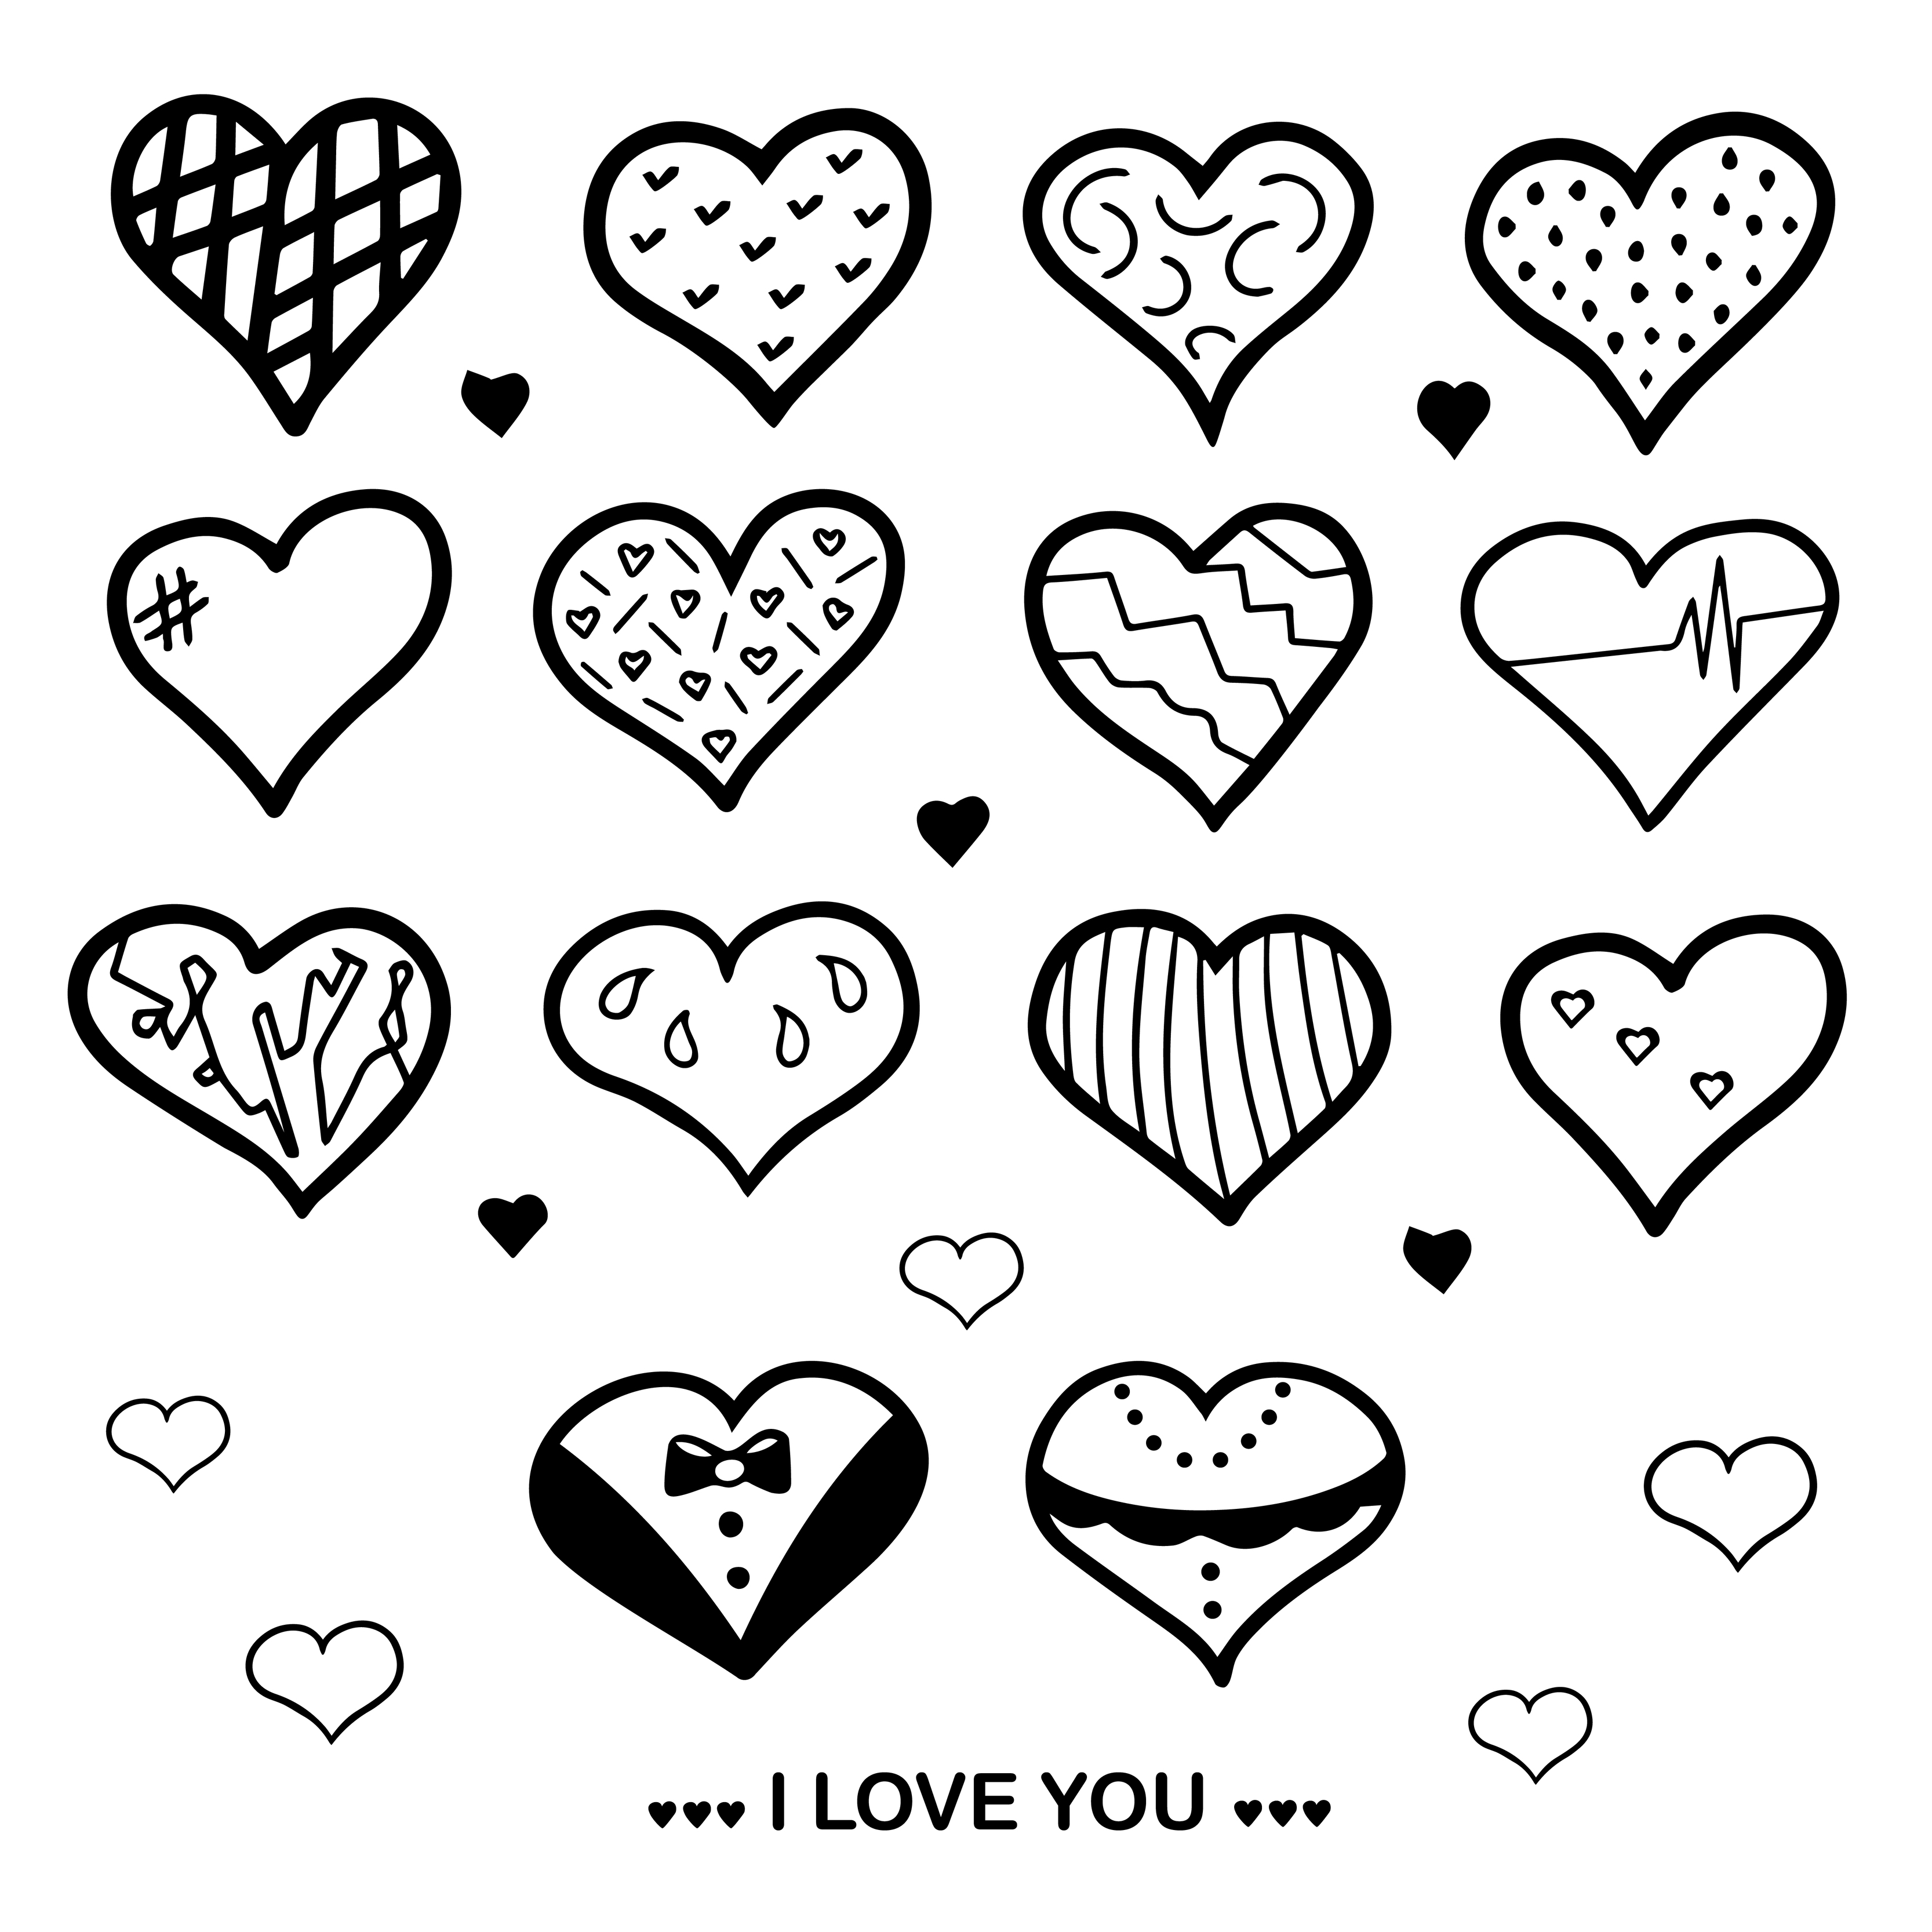 hearts collection, i love you, doodle. Illustration for background, wallpaper, covers, packaging, greeting cards, posters, stickers, textile, seasonal design. Isolated on white background